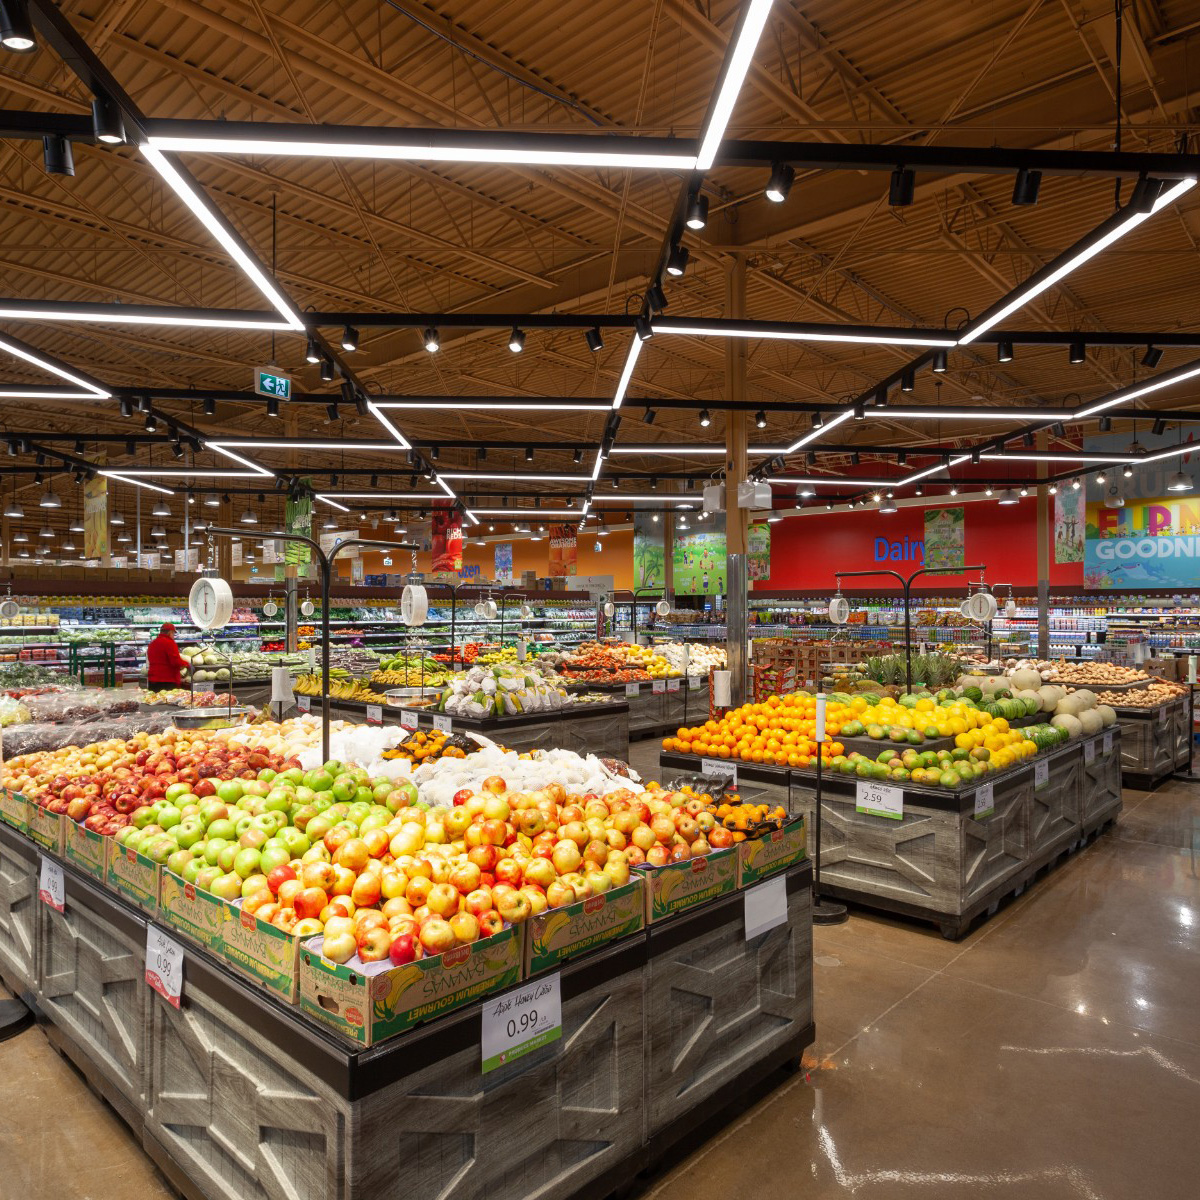 A photo of the produce section in the newly renovated Seafood City, showcasing it's lighting features and mass timber roof.